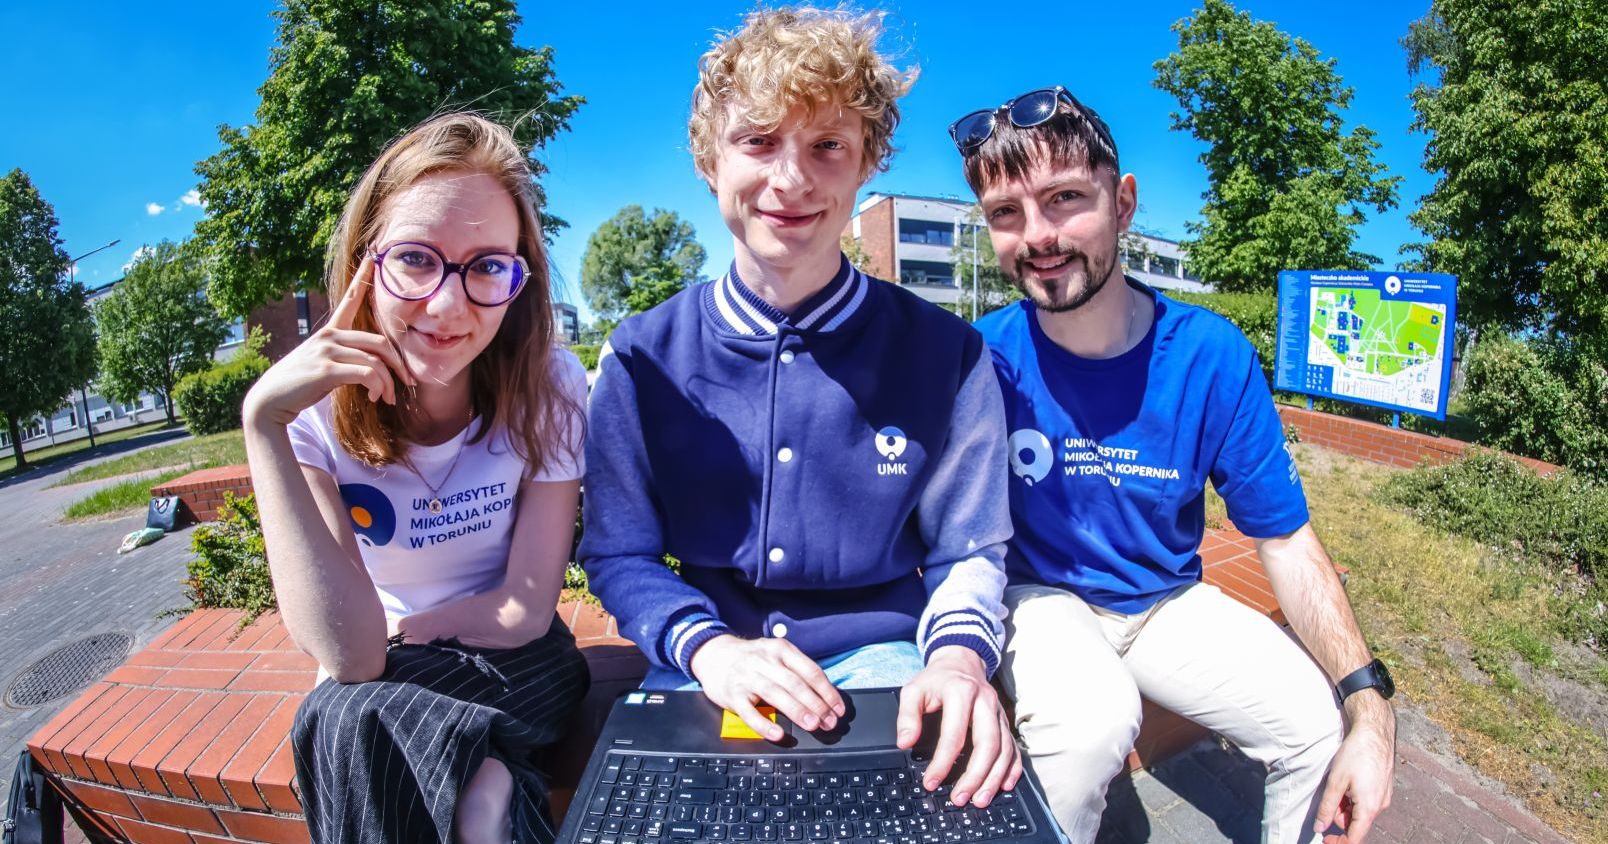 A female student and two male students are sitting next to each other, outside. The student sitting in the middle holds a laptop on his lap. The students are wearing clothes with the UMK logo